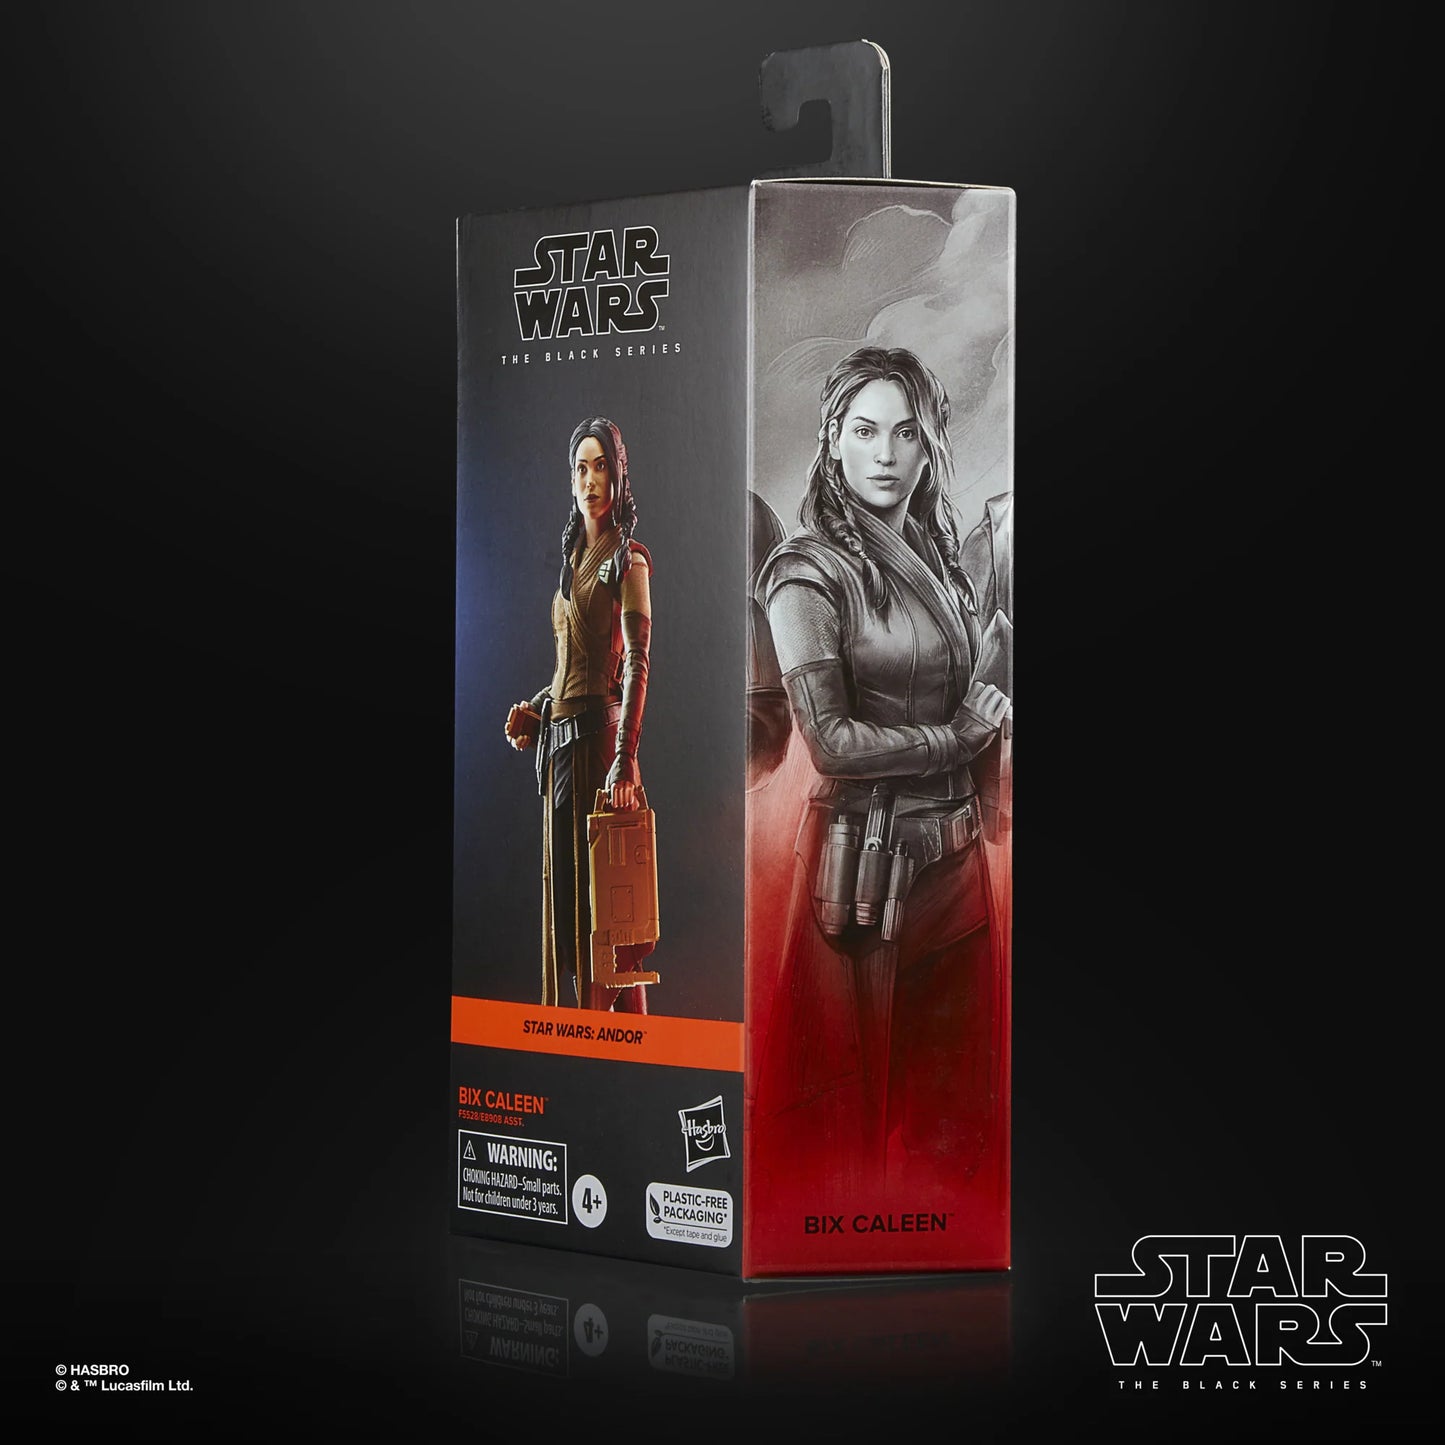 
                  
                    Star Wars The Black Series Bix Caleen action figure, featuring the character from Star Wars: Andor. The figure is complete with a character-inspired accessory and offers multiple points of articulation for dynamic posing.
                  
                